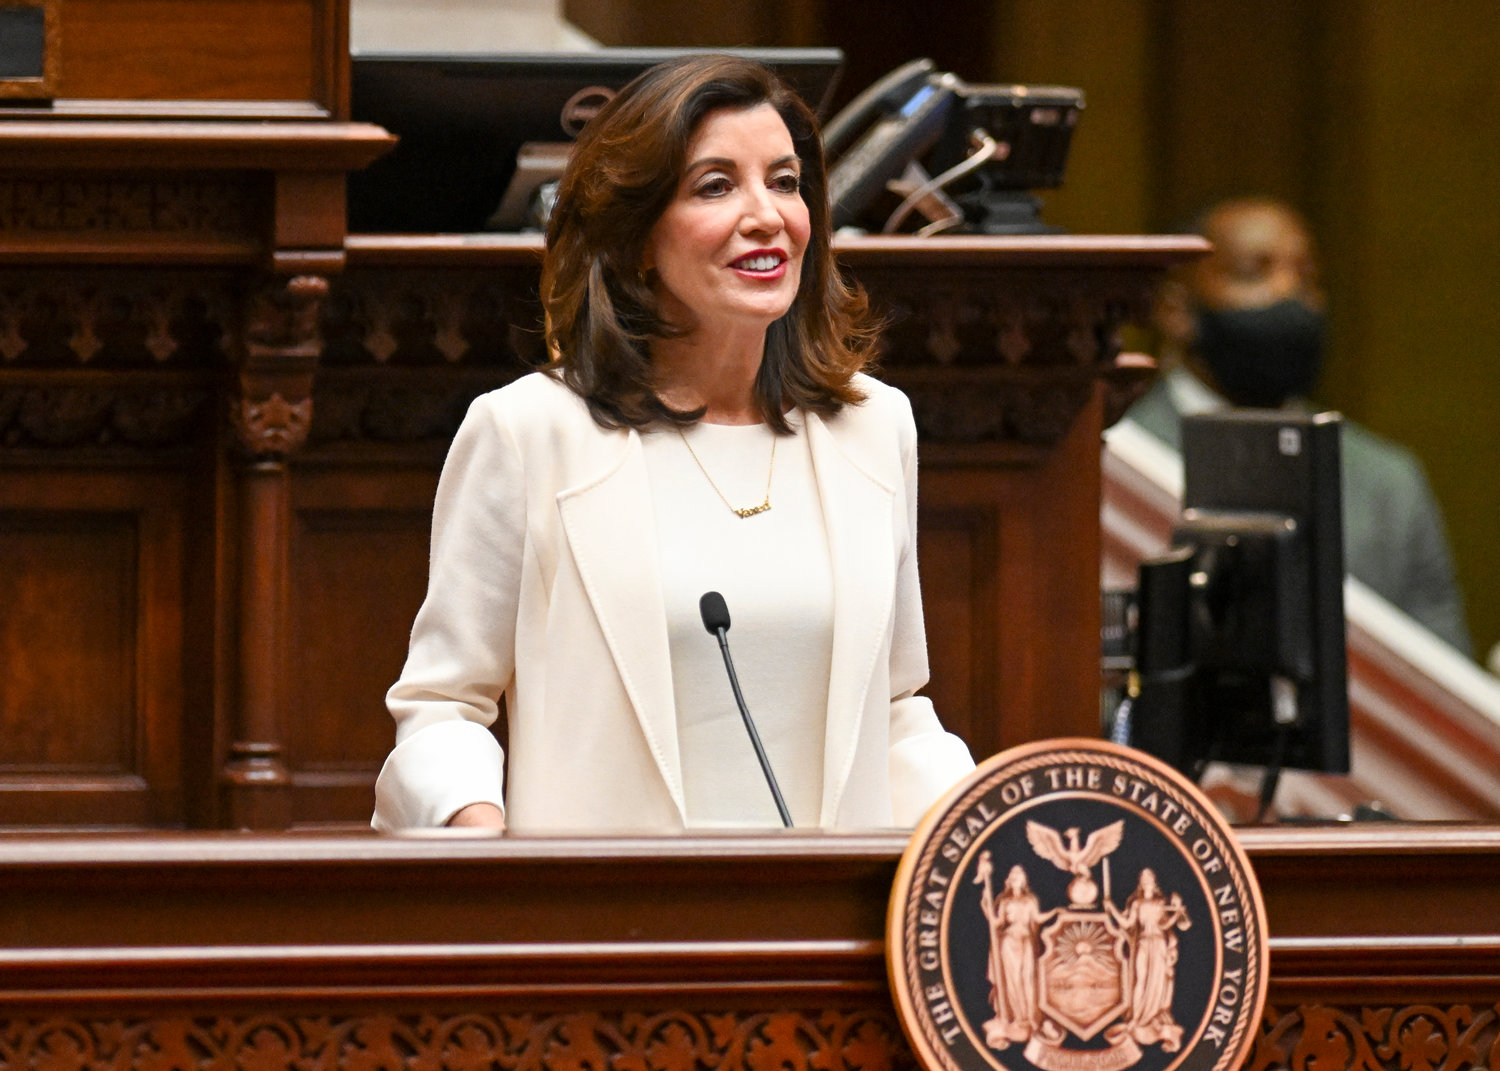 READY FOR THE RACE — New York Gov. Kathy Hochul delivers her first State of the State address in the Assembly Chamber at the state Capitol, on Wednesday, Jan. 5, 2022, in Albany. According to reports, Hochul leads the field of gubernatorial hopefuls with nearly $22 million raised so far for her campaign.(AP photo)